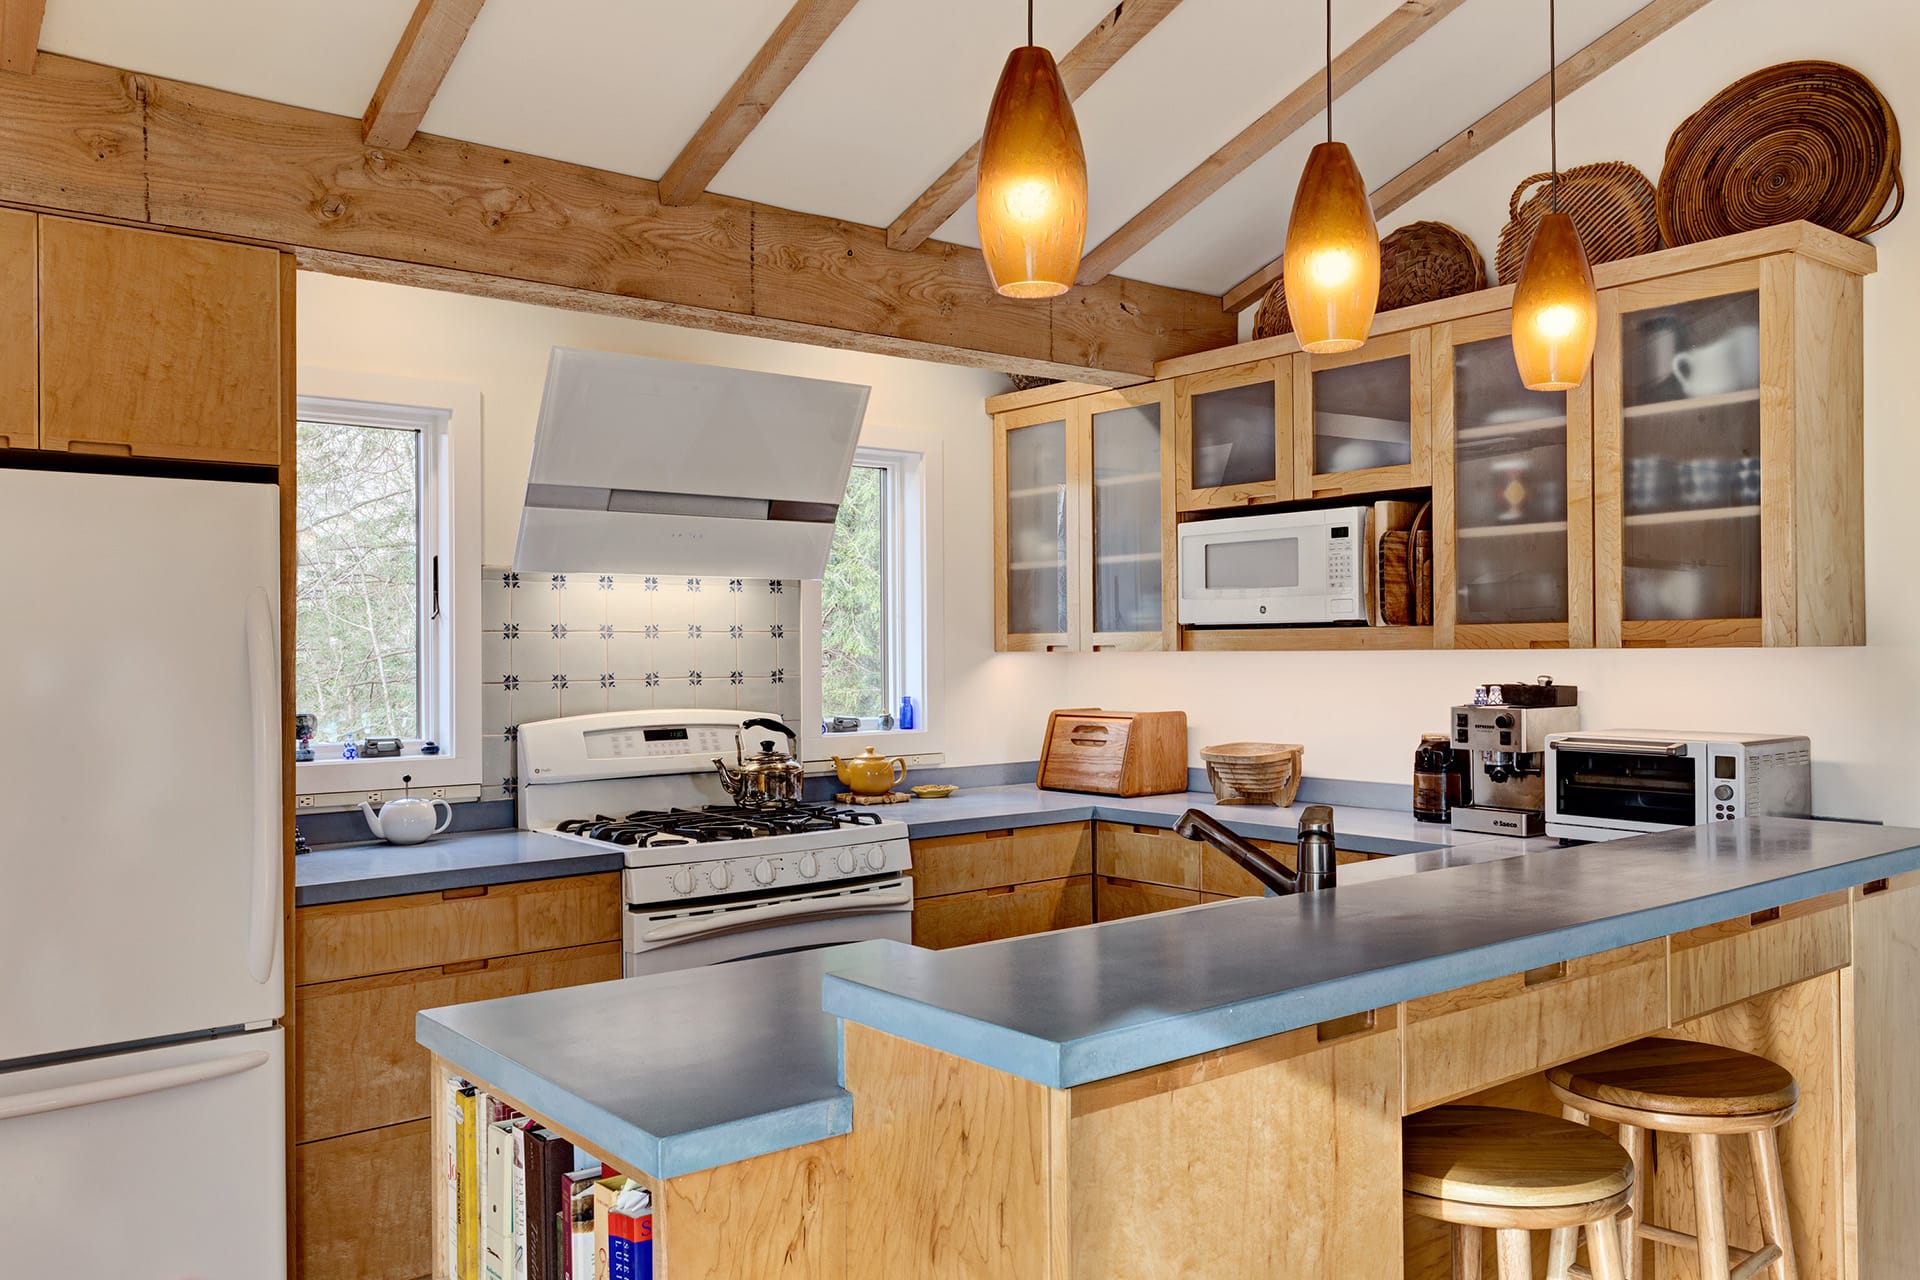 All-wood kitchen with blue stone countertops